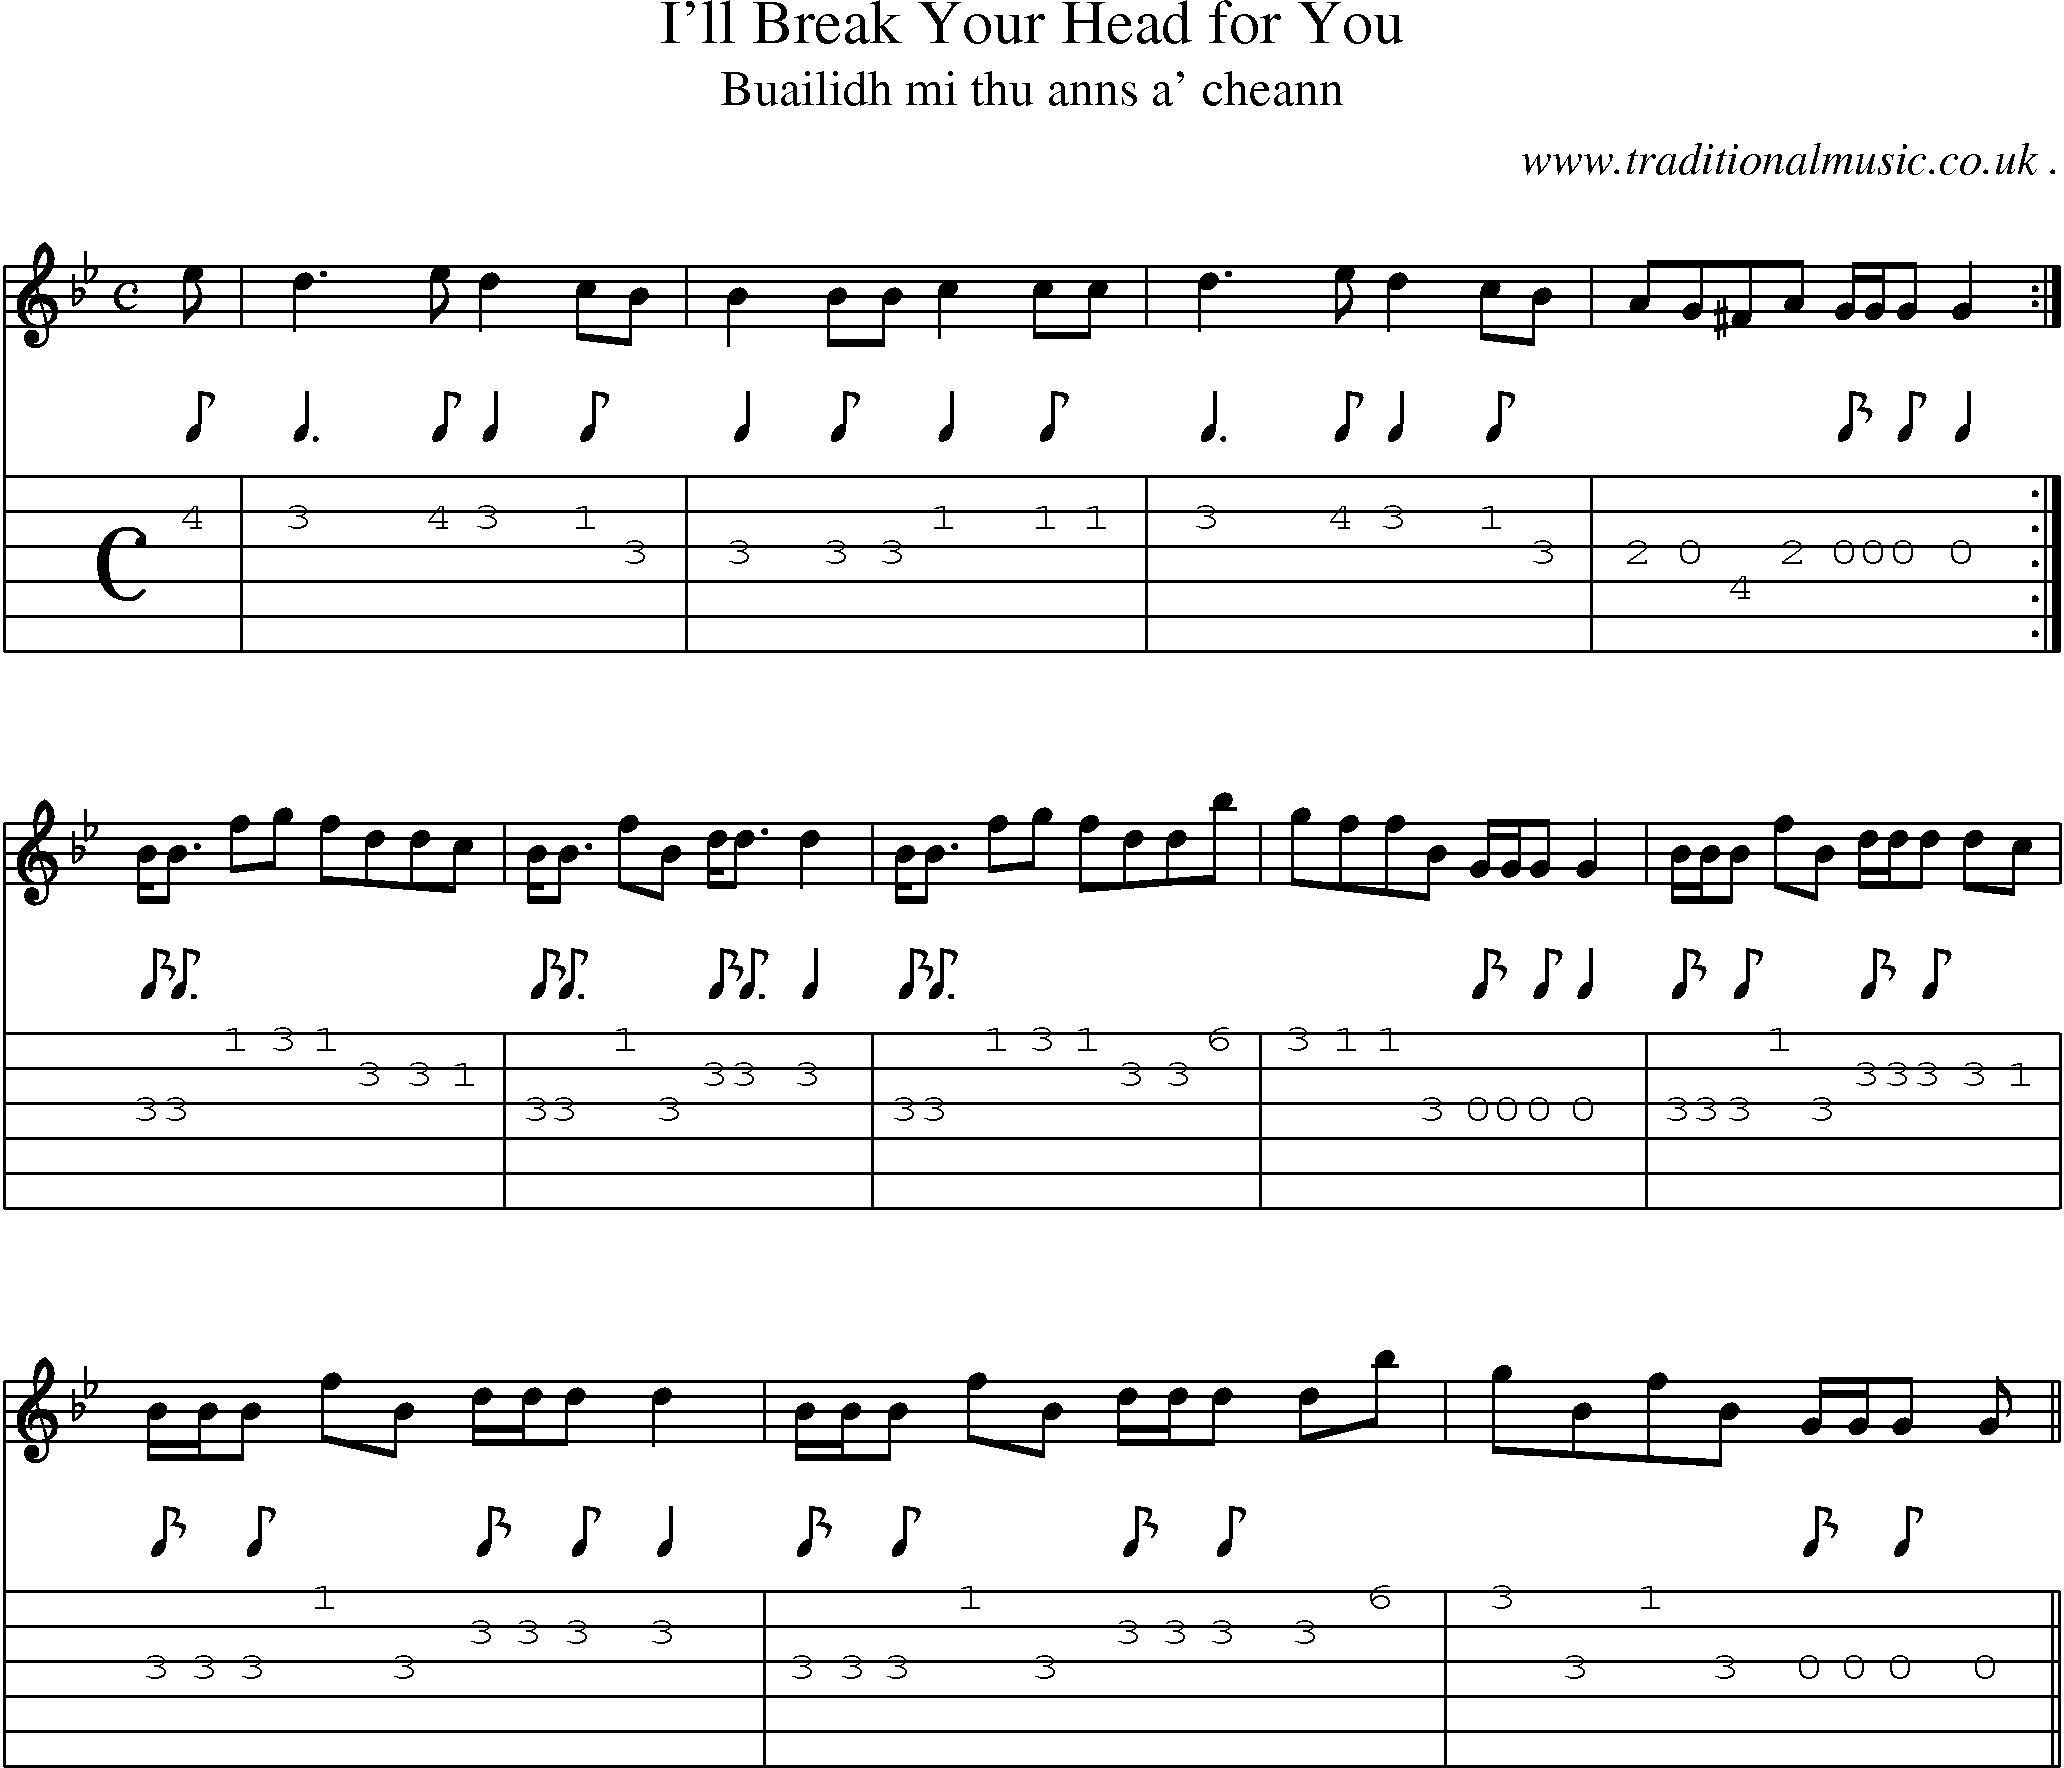 Sheet-music  score, Chords and Guitar Tabs for Ill Break Your Head For You